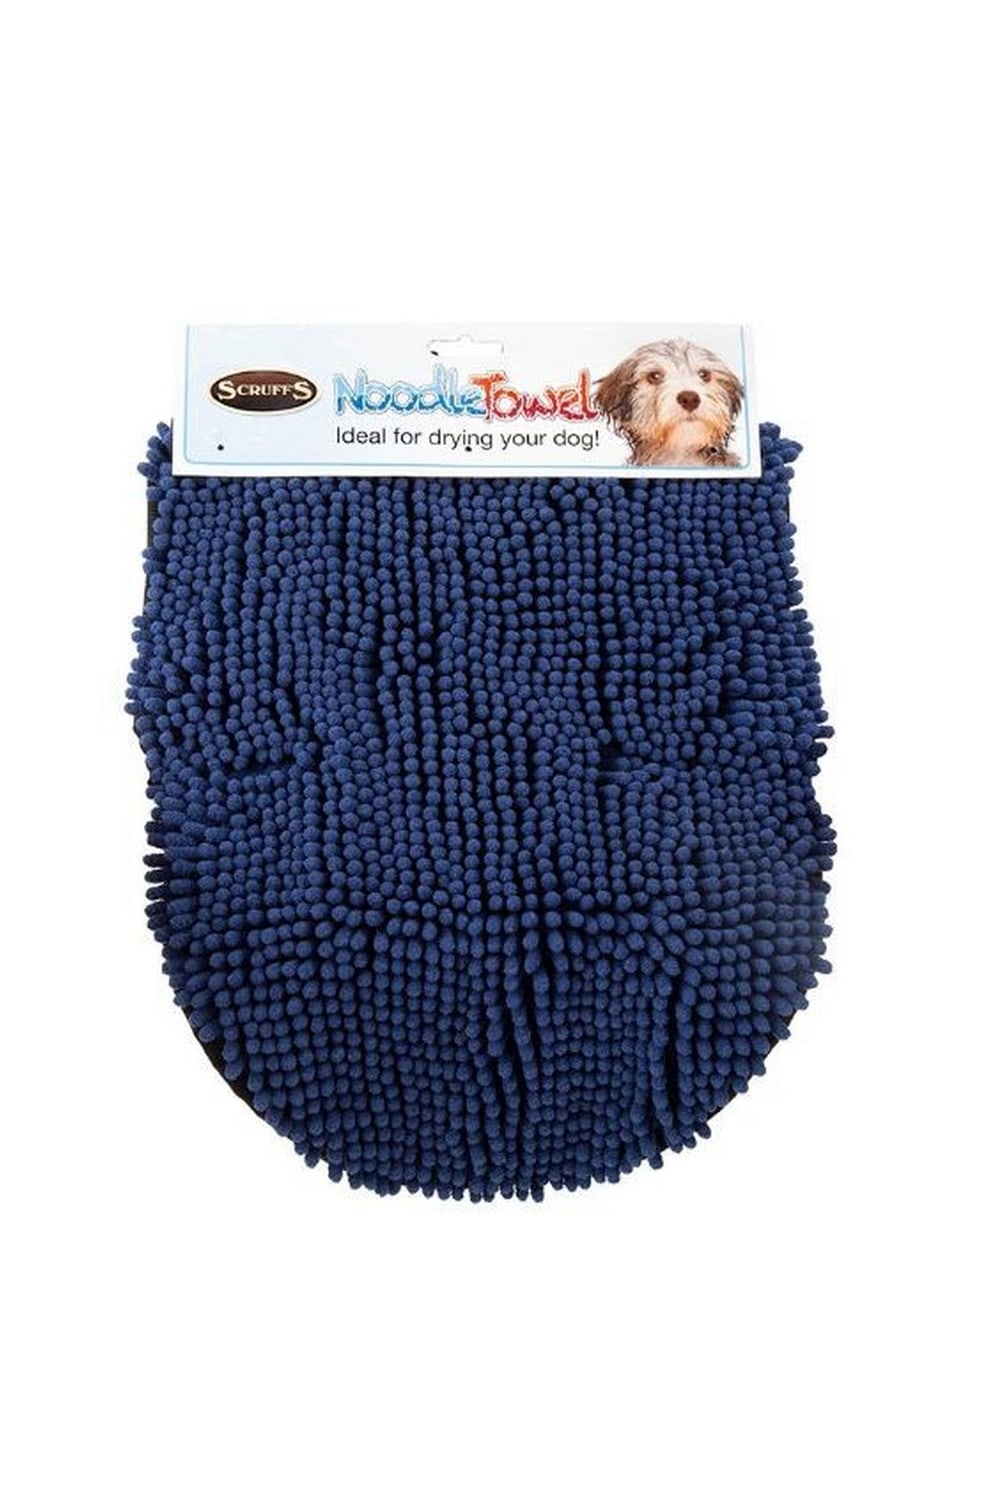 Scruffs Noodle Dog Drying Towel (Blue) (One Size)